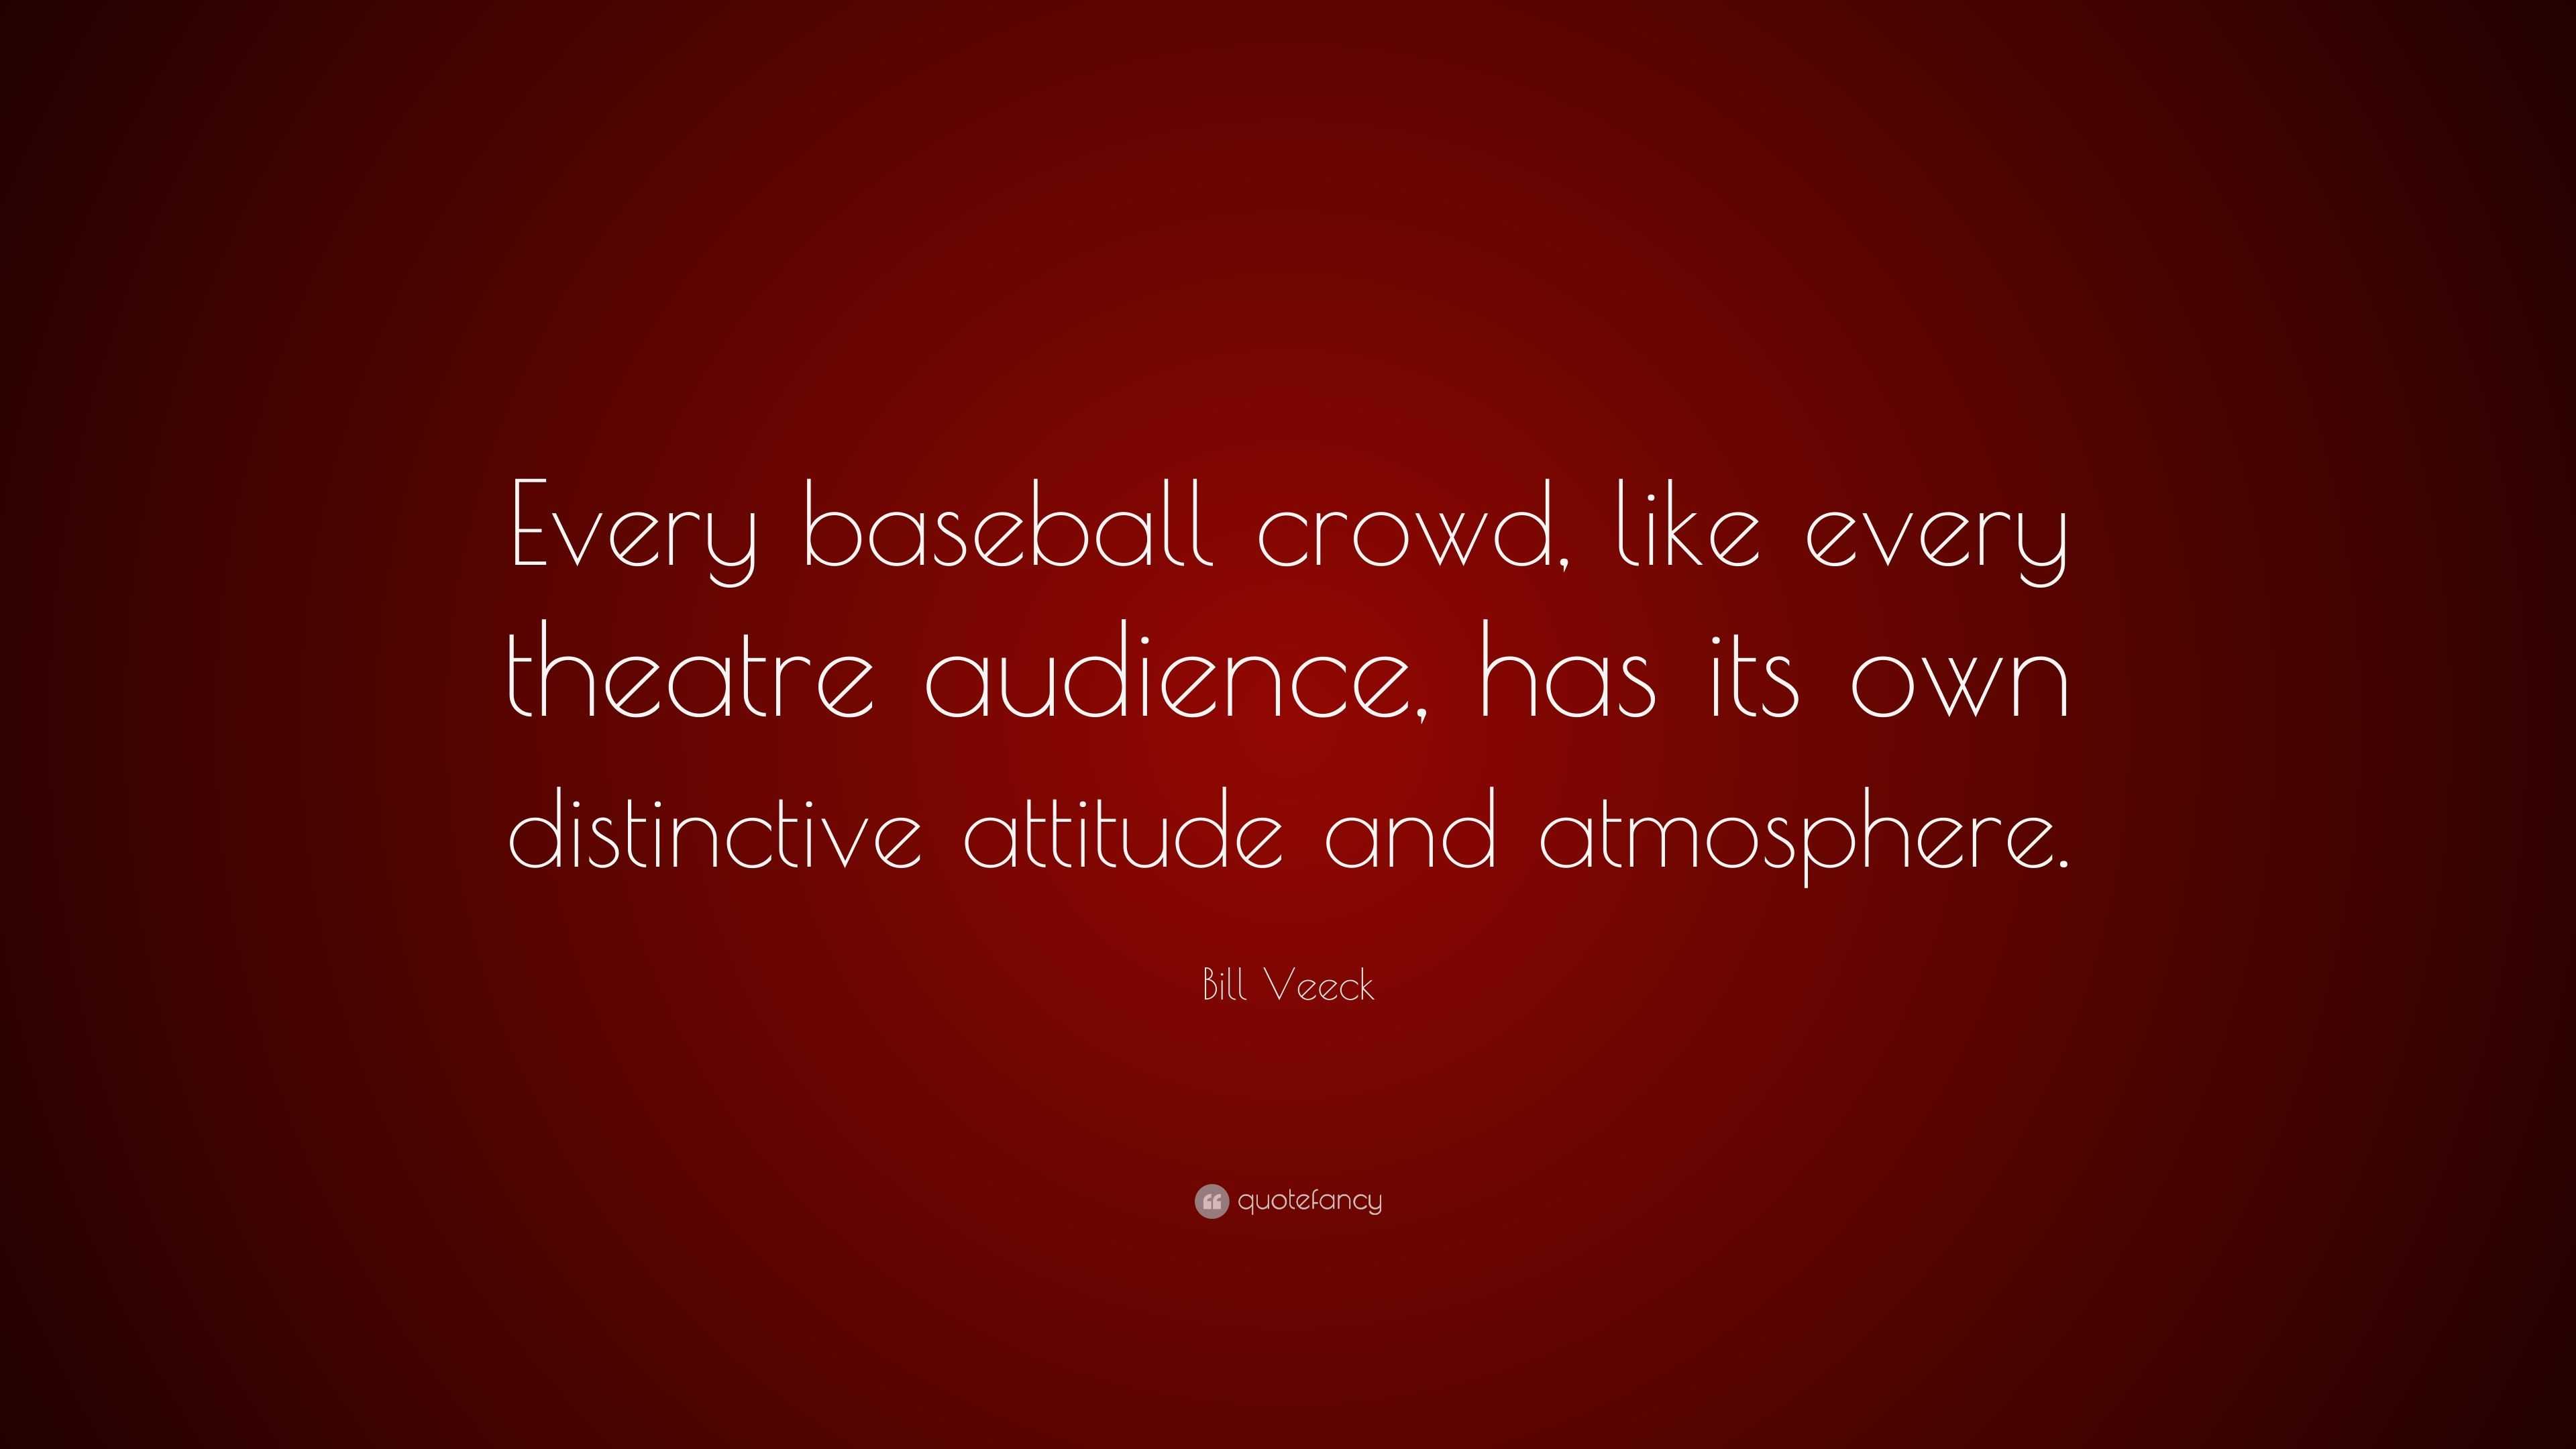 Bill Veeck Quote: “Every baseball crowd, like every theatre audience ...